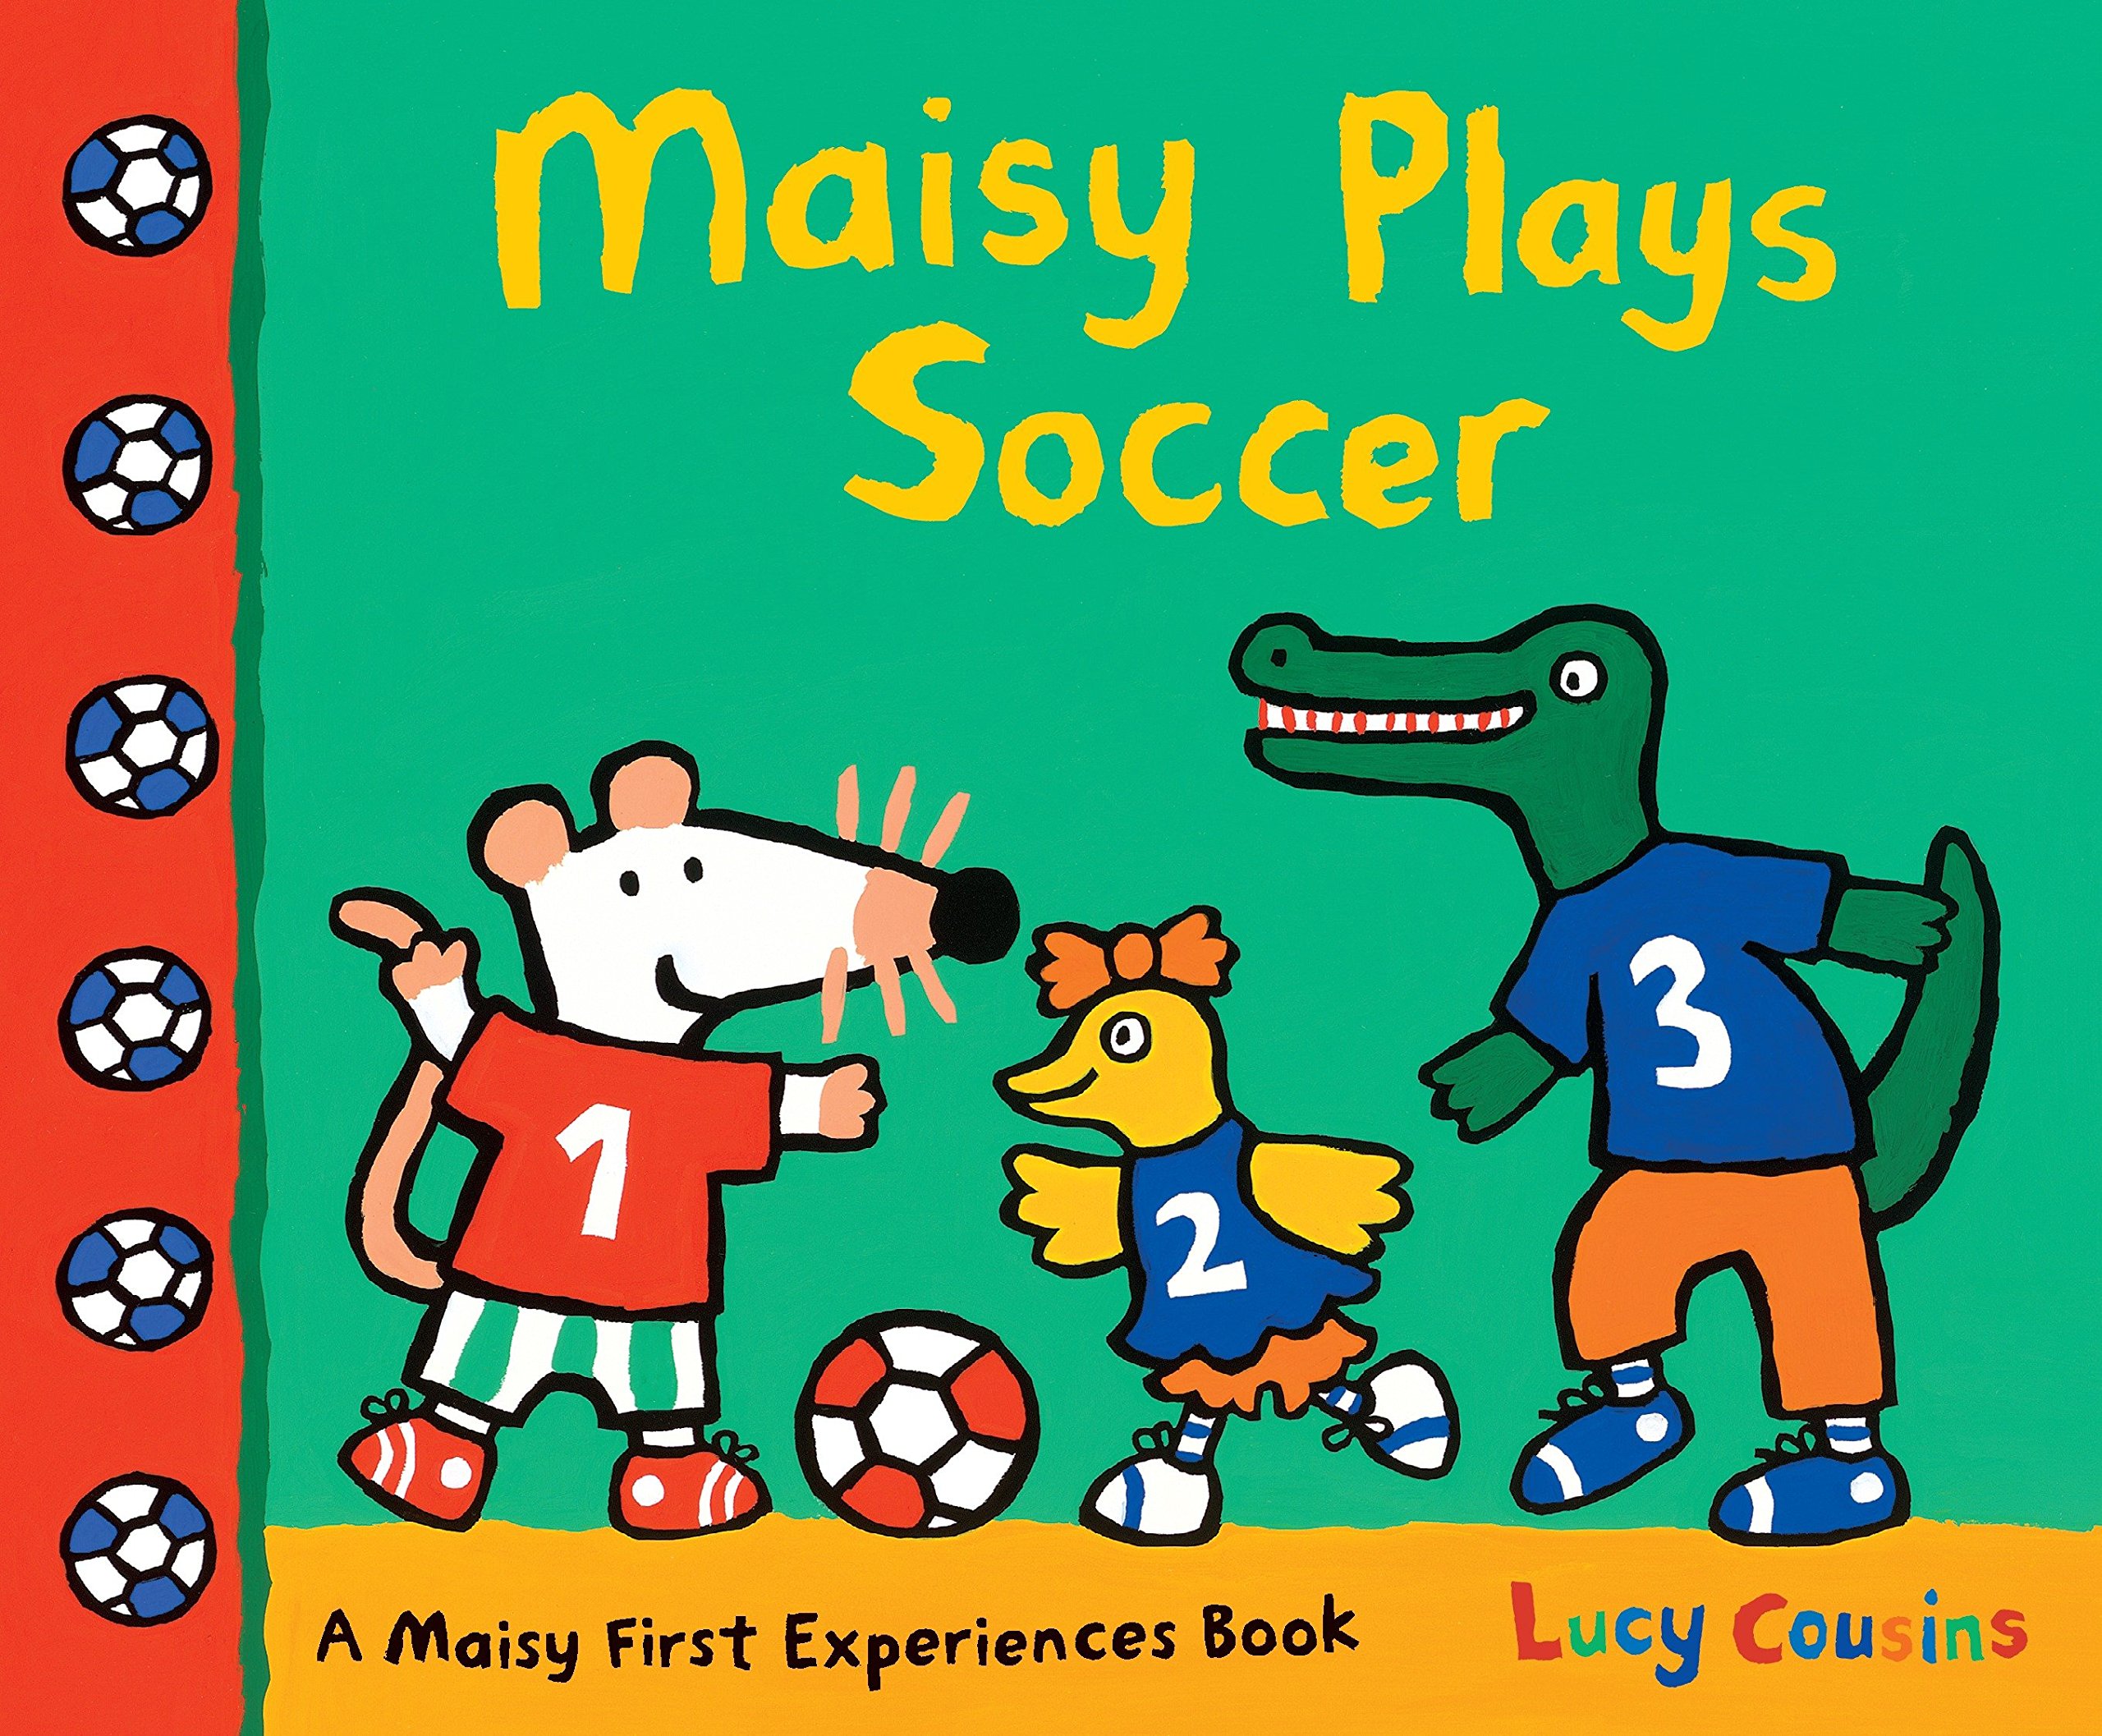 Maisy Plays Soccer by Lucy Cousins book cover